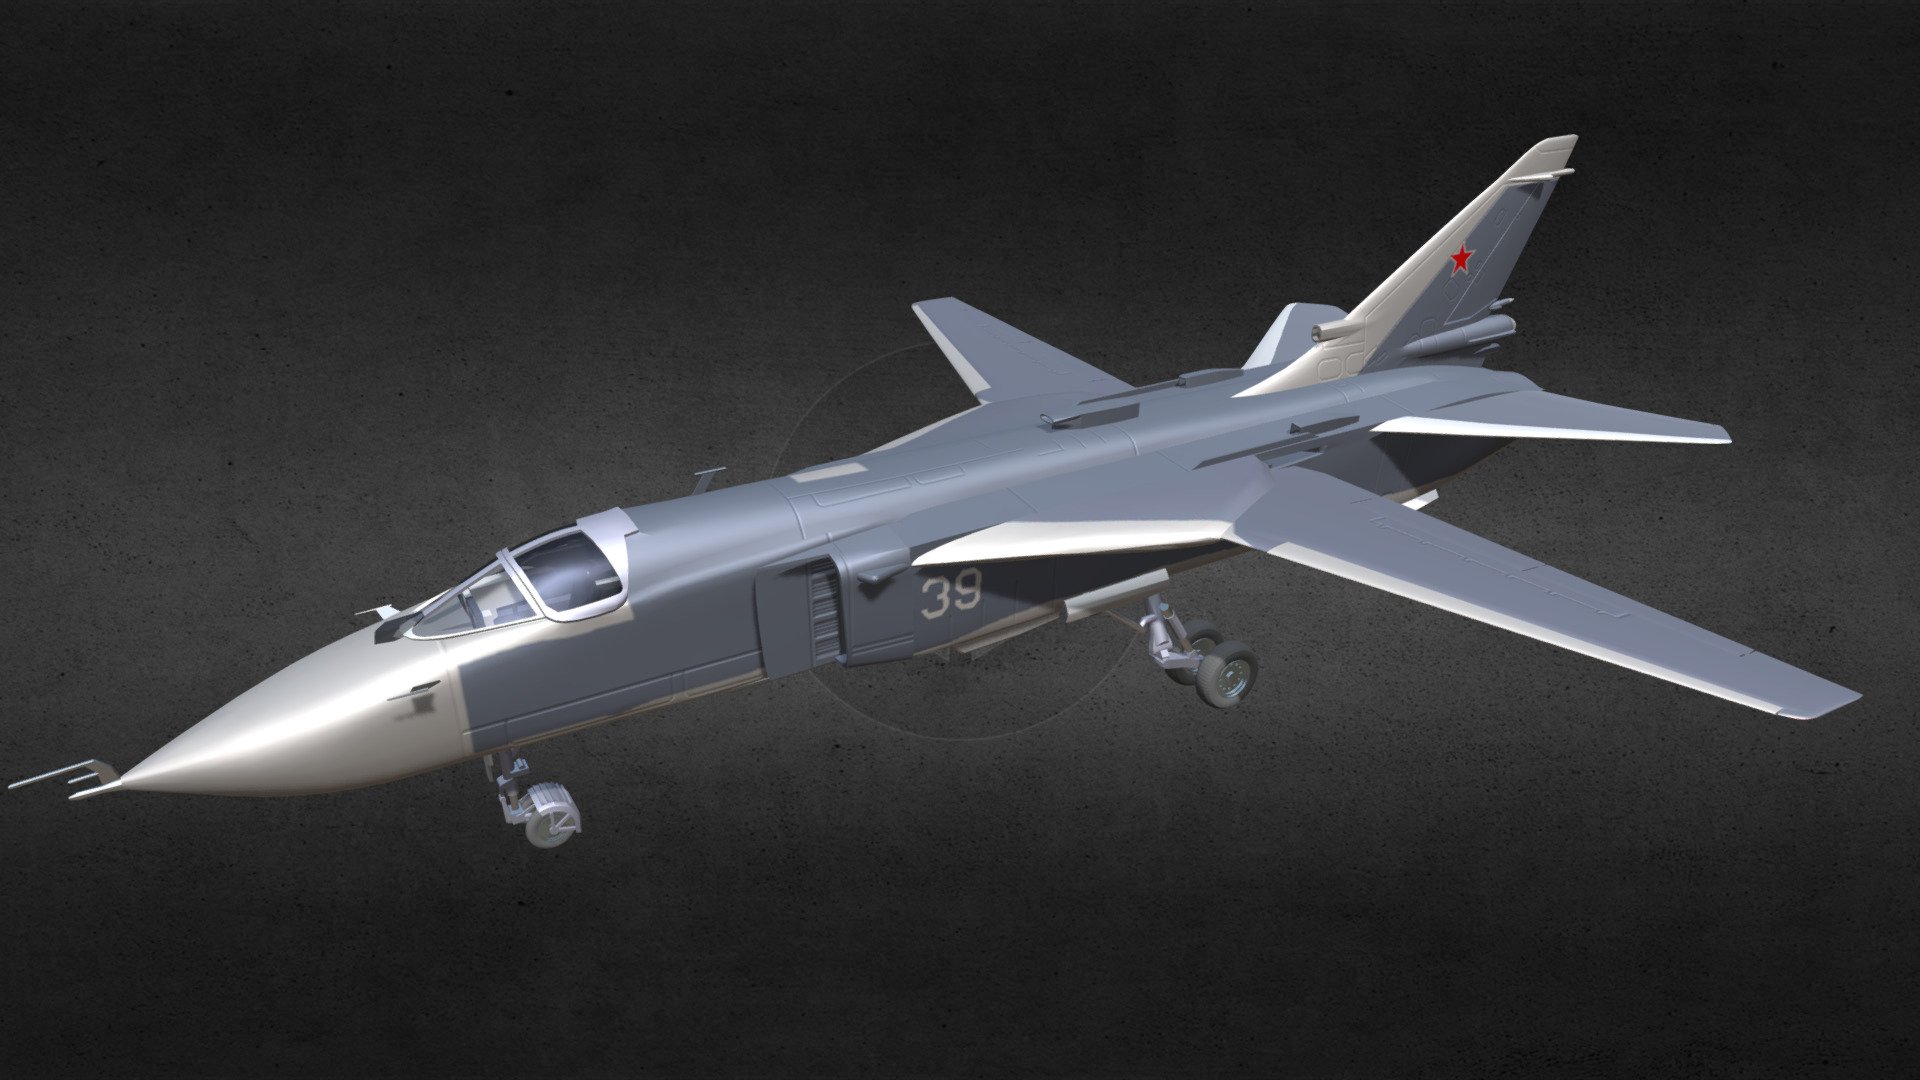 The Sukhoi Su-24 (NATO reporting name Fencer) was the Soviet Union's most advanced all-weather interdiction and attack aircraft in the 1970s and 1980s. It was believed to been developed from the American F-111 technology through the espionage activities during the Vietnam War.

Product Features:


The aircraft includes groups, which your software should read as separate parts, including:
Canopy, wings, rudder, flaps, ailerons, landing gear and doors.
The model is UV mapped and texture/ bump maps are included.

Original model by Digimation and sold here with permission 3d model